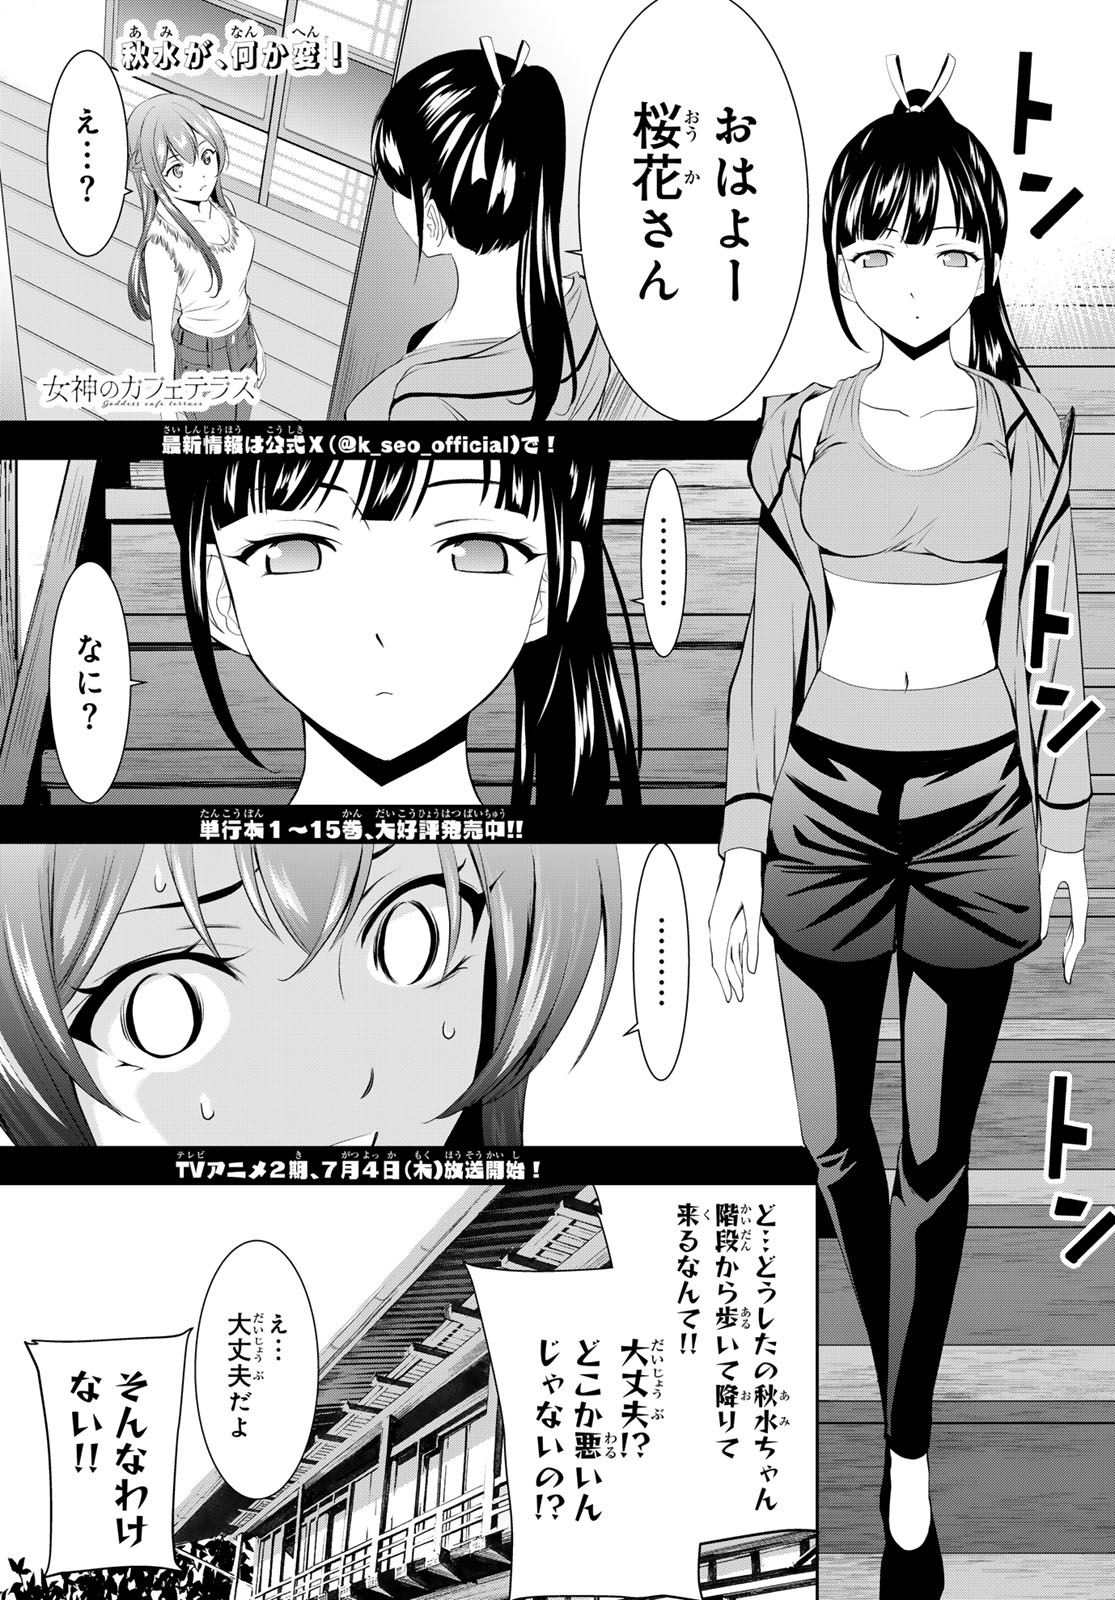 Megami no Cafe Terace - Chapter 152 - Page 1